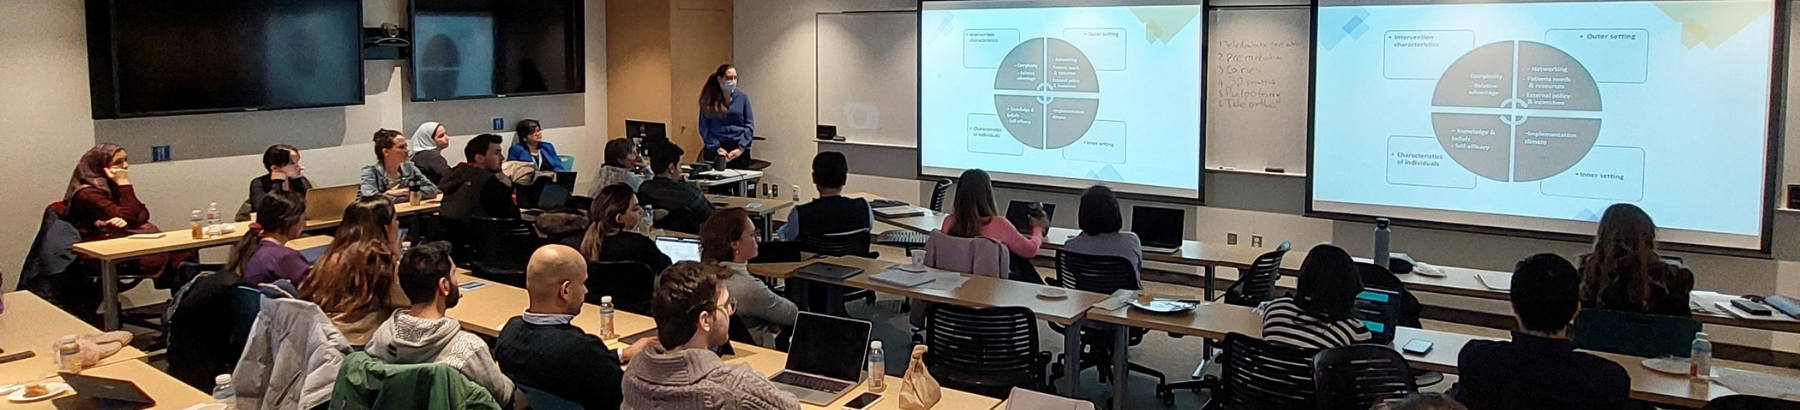 Photo taken from the back of a lecture room during a presentation: people are sitting down looking at two screen projectors while someone is presenting